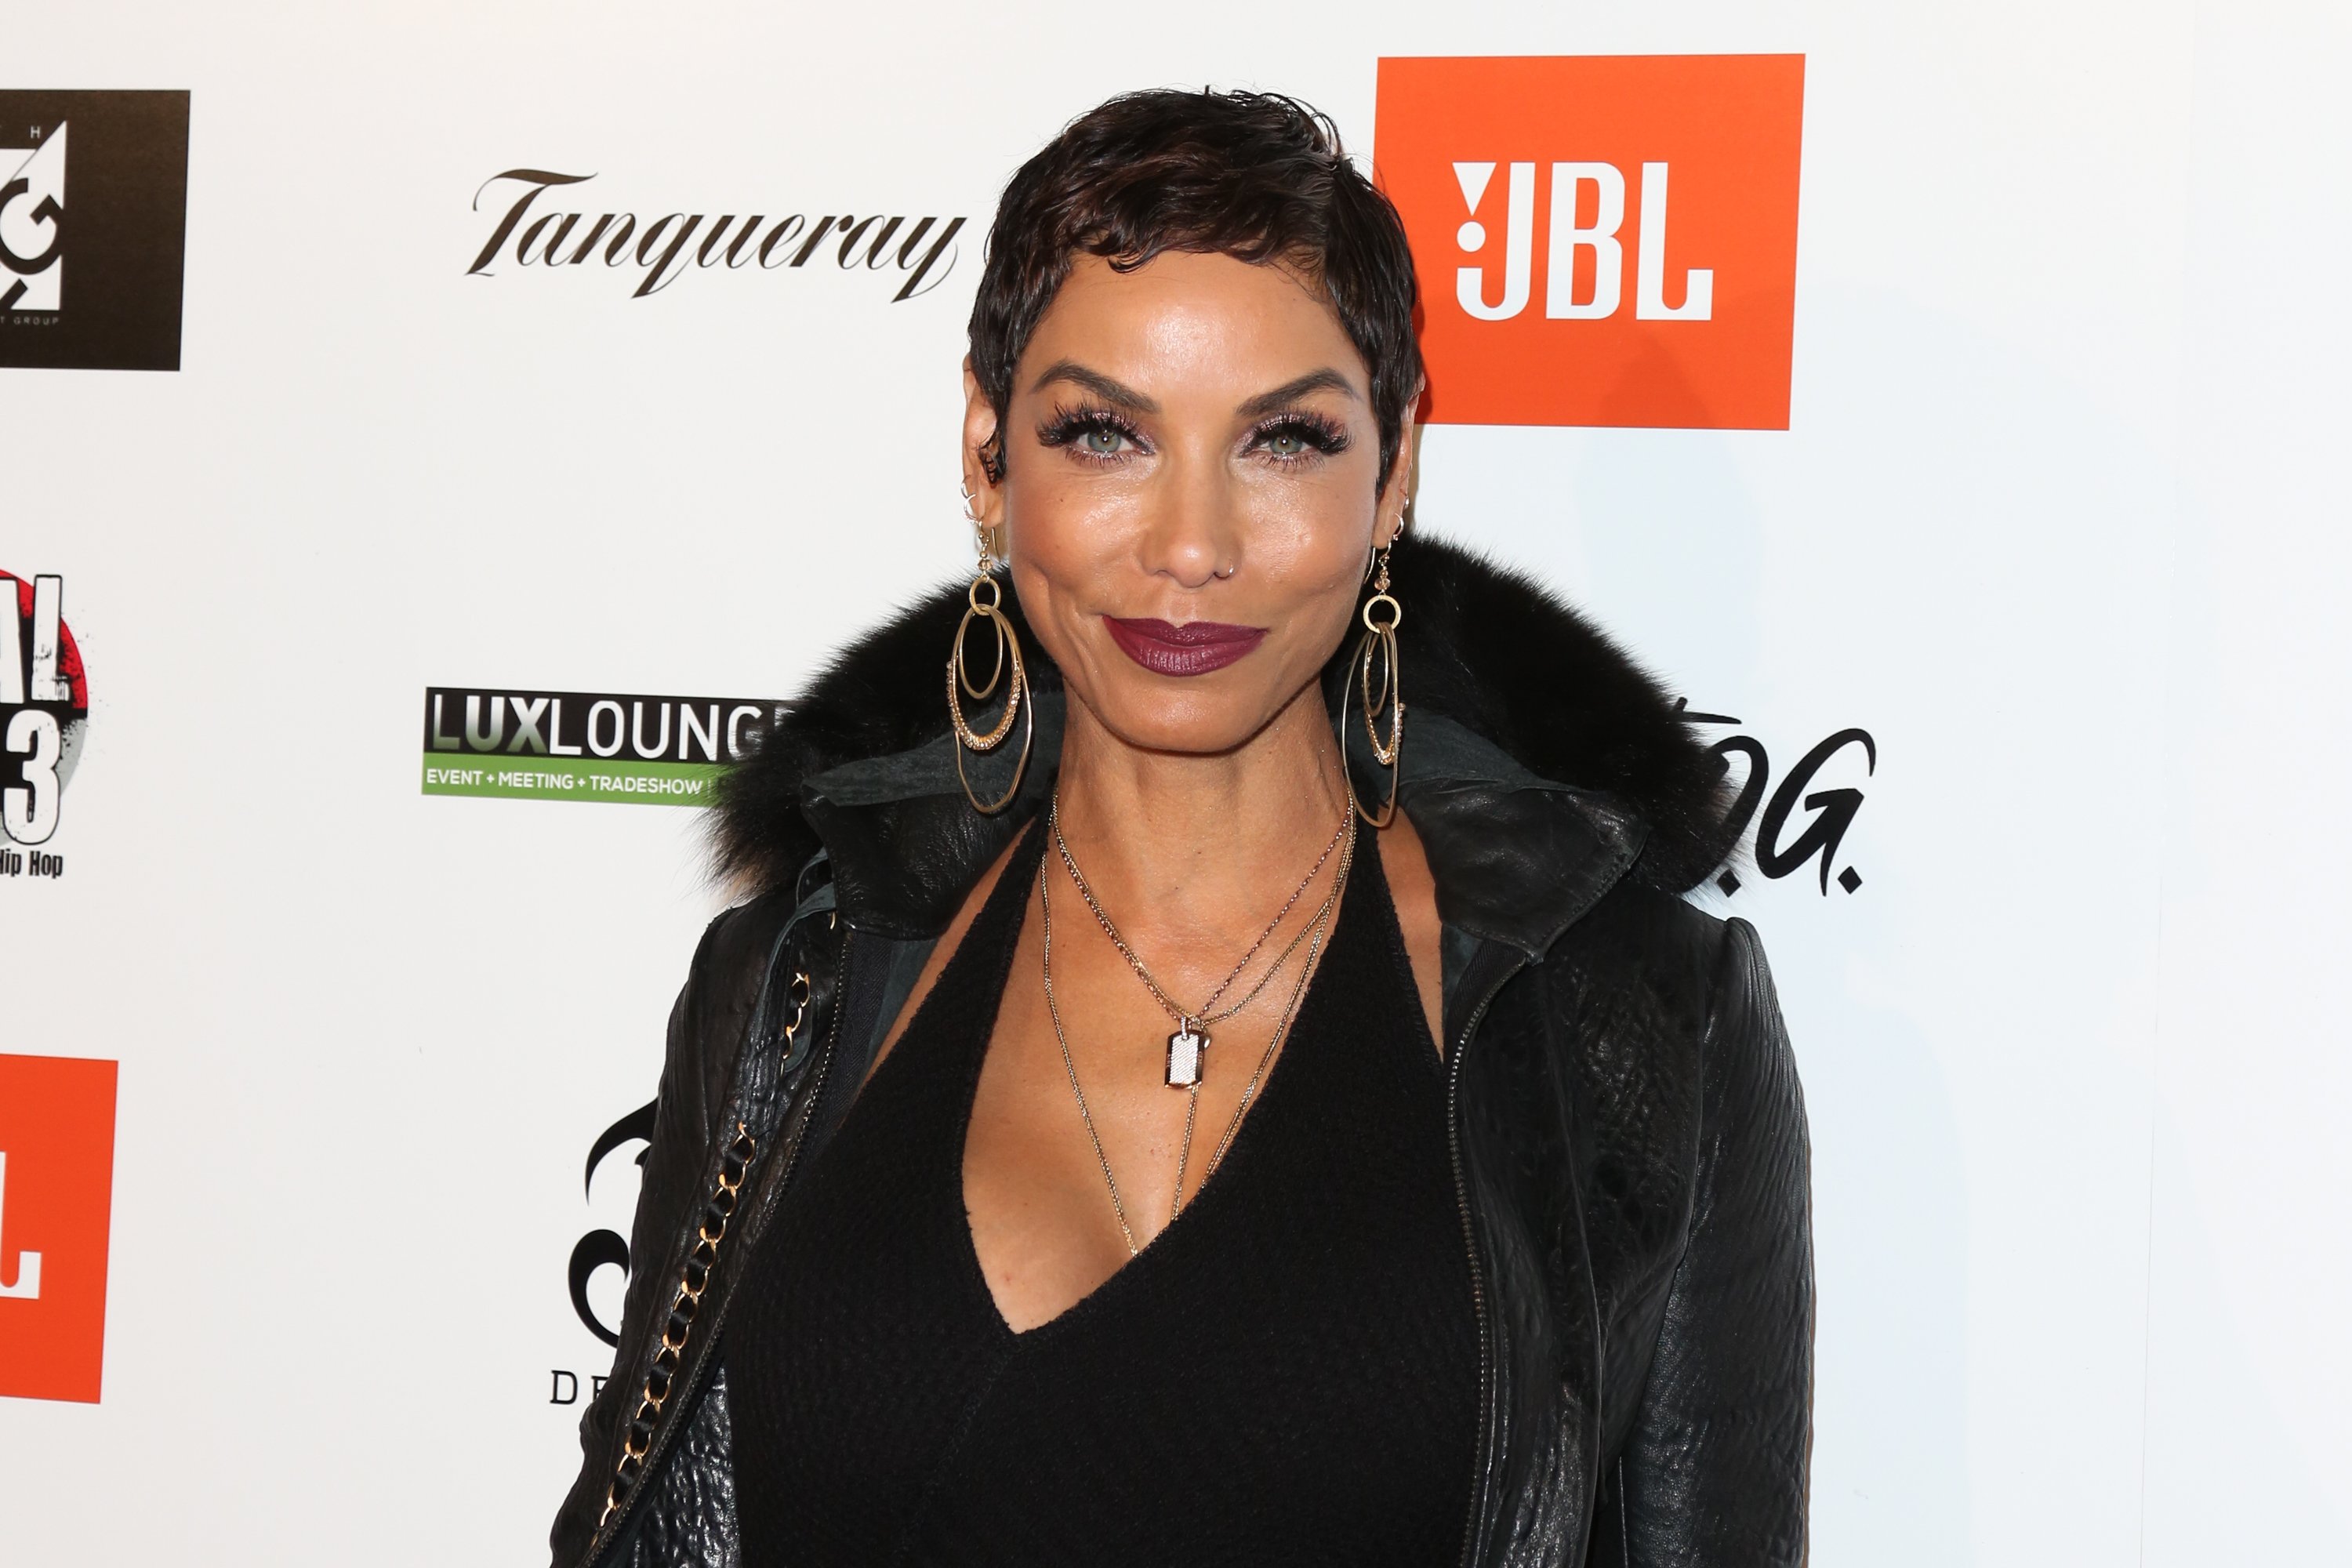 Nicole Murphy attending a JBL all-star bash in February 2018. | Photo: Getty Images